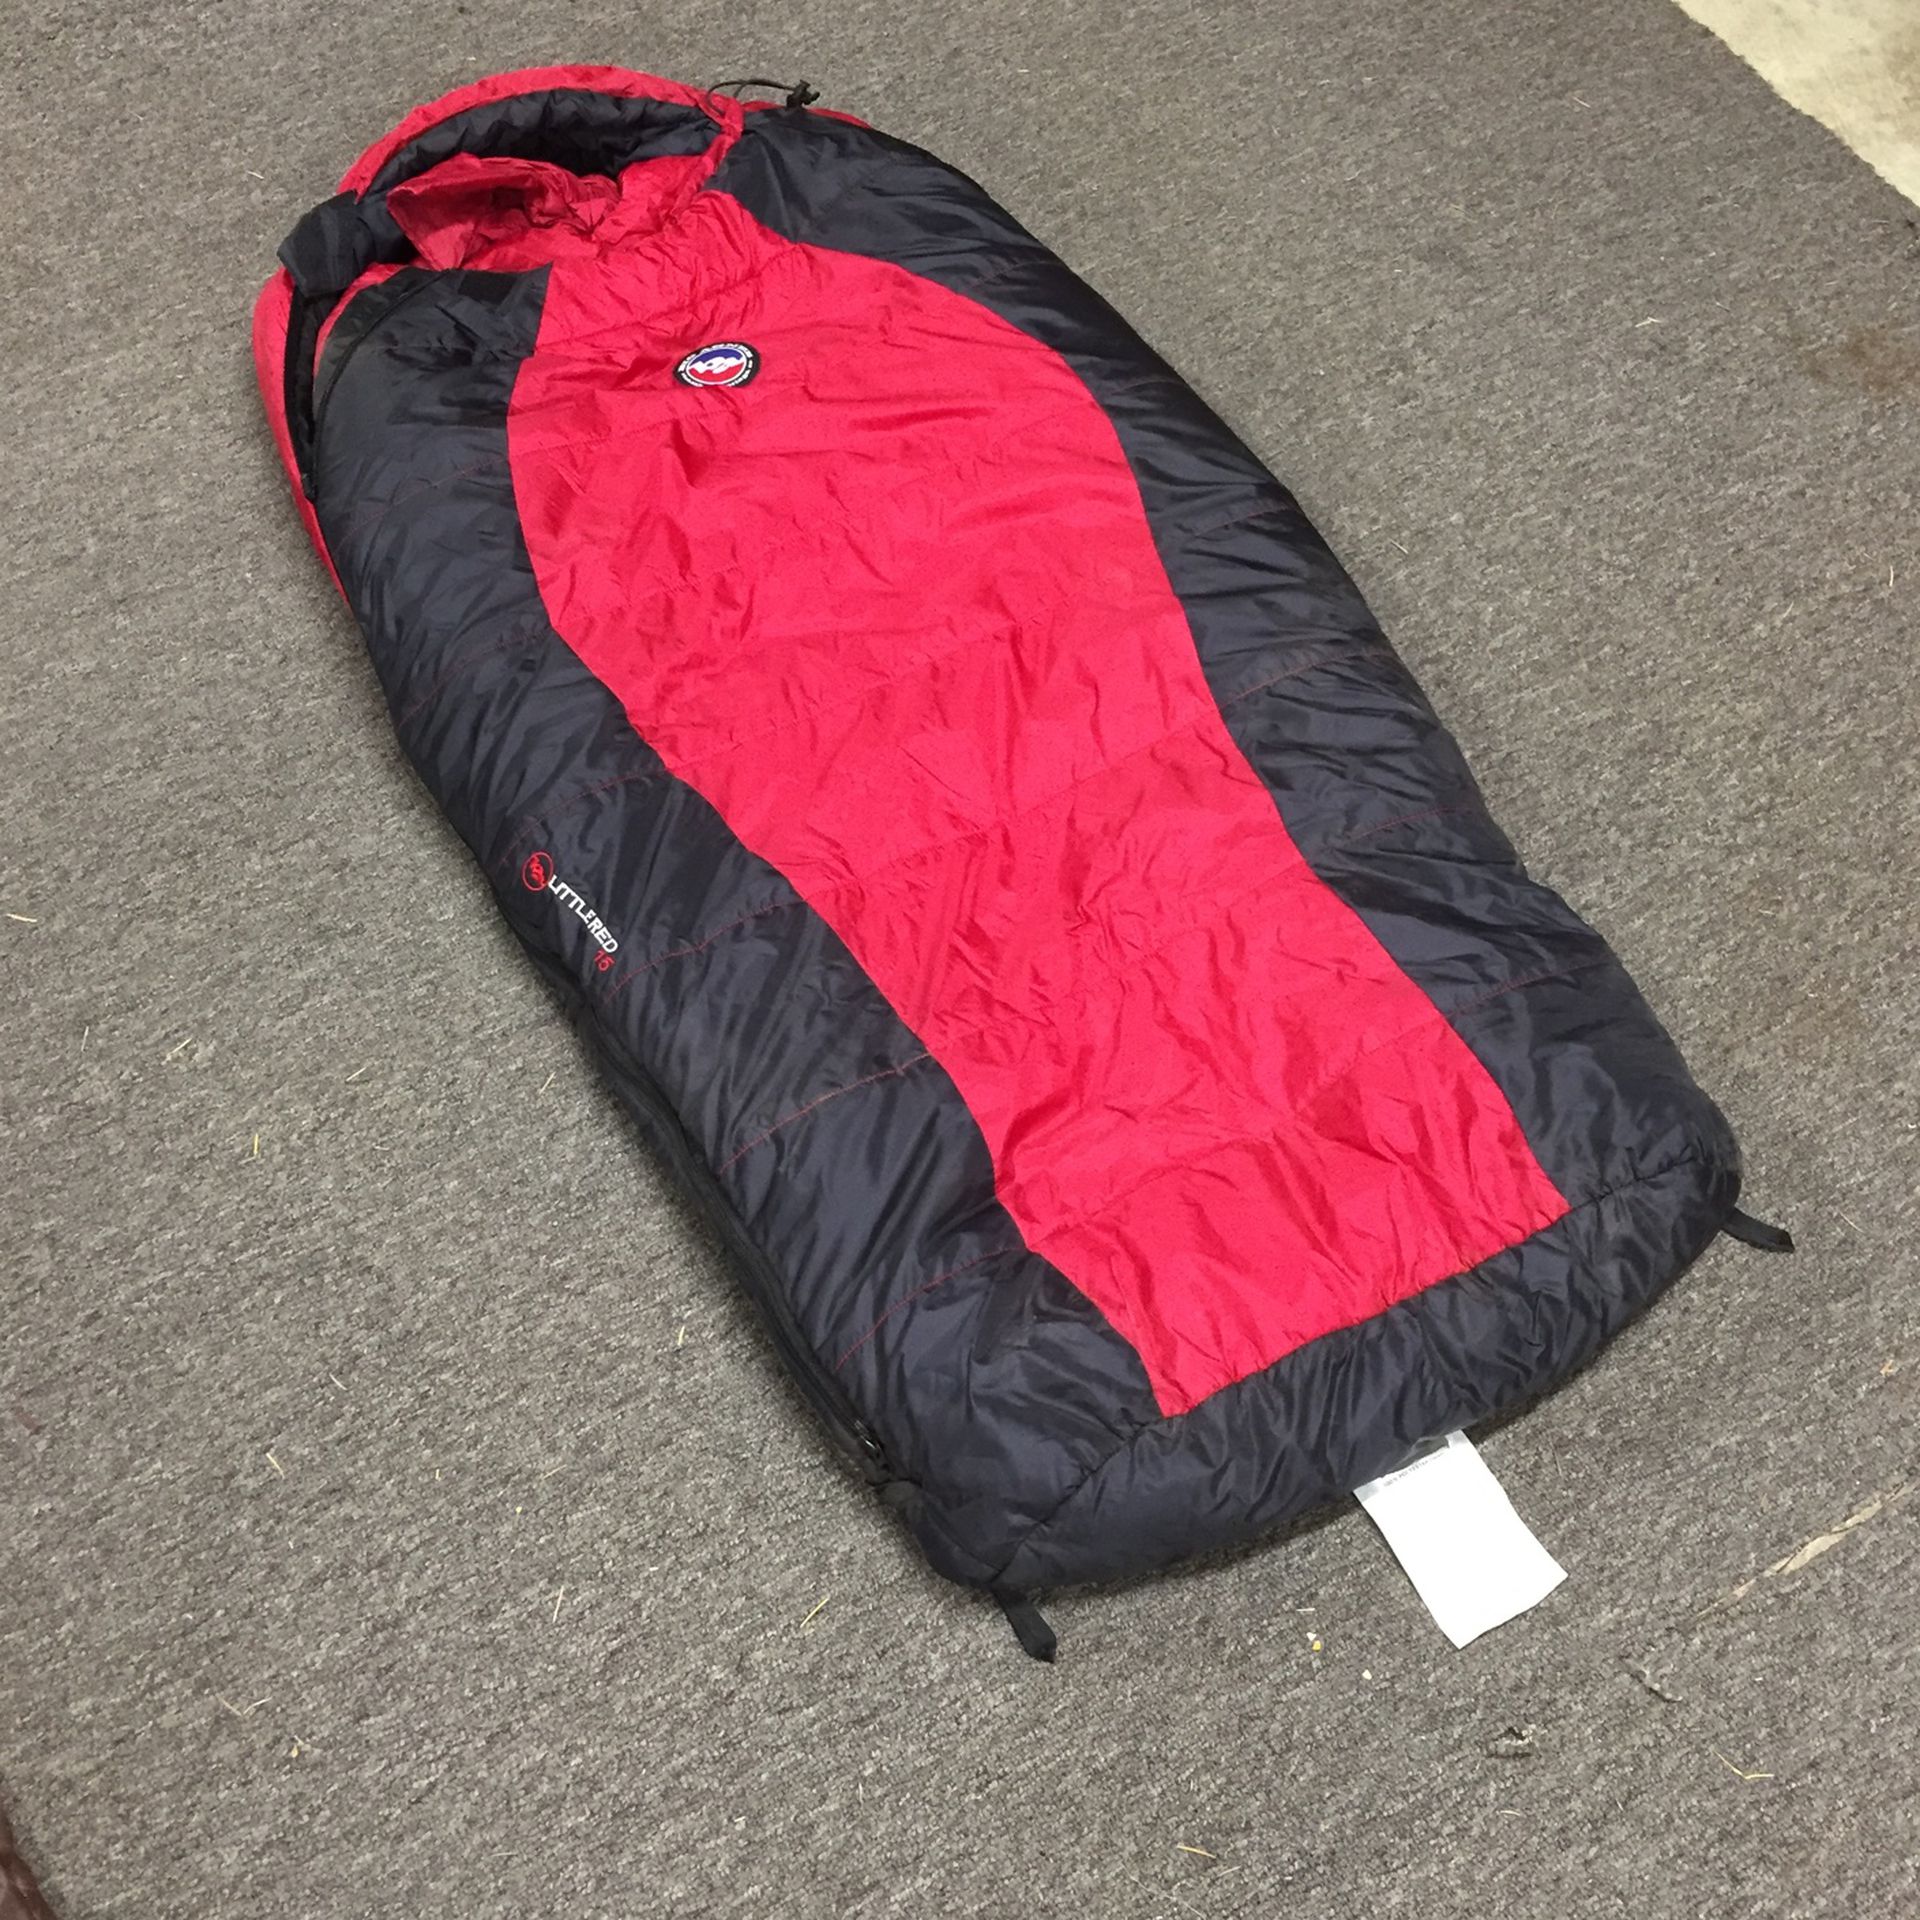 Junior sleeping bag -Big Agnes rated to 15 degrees